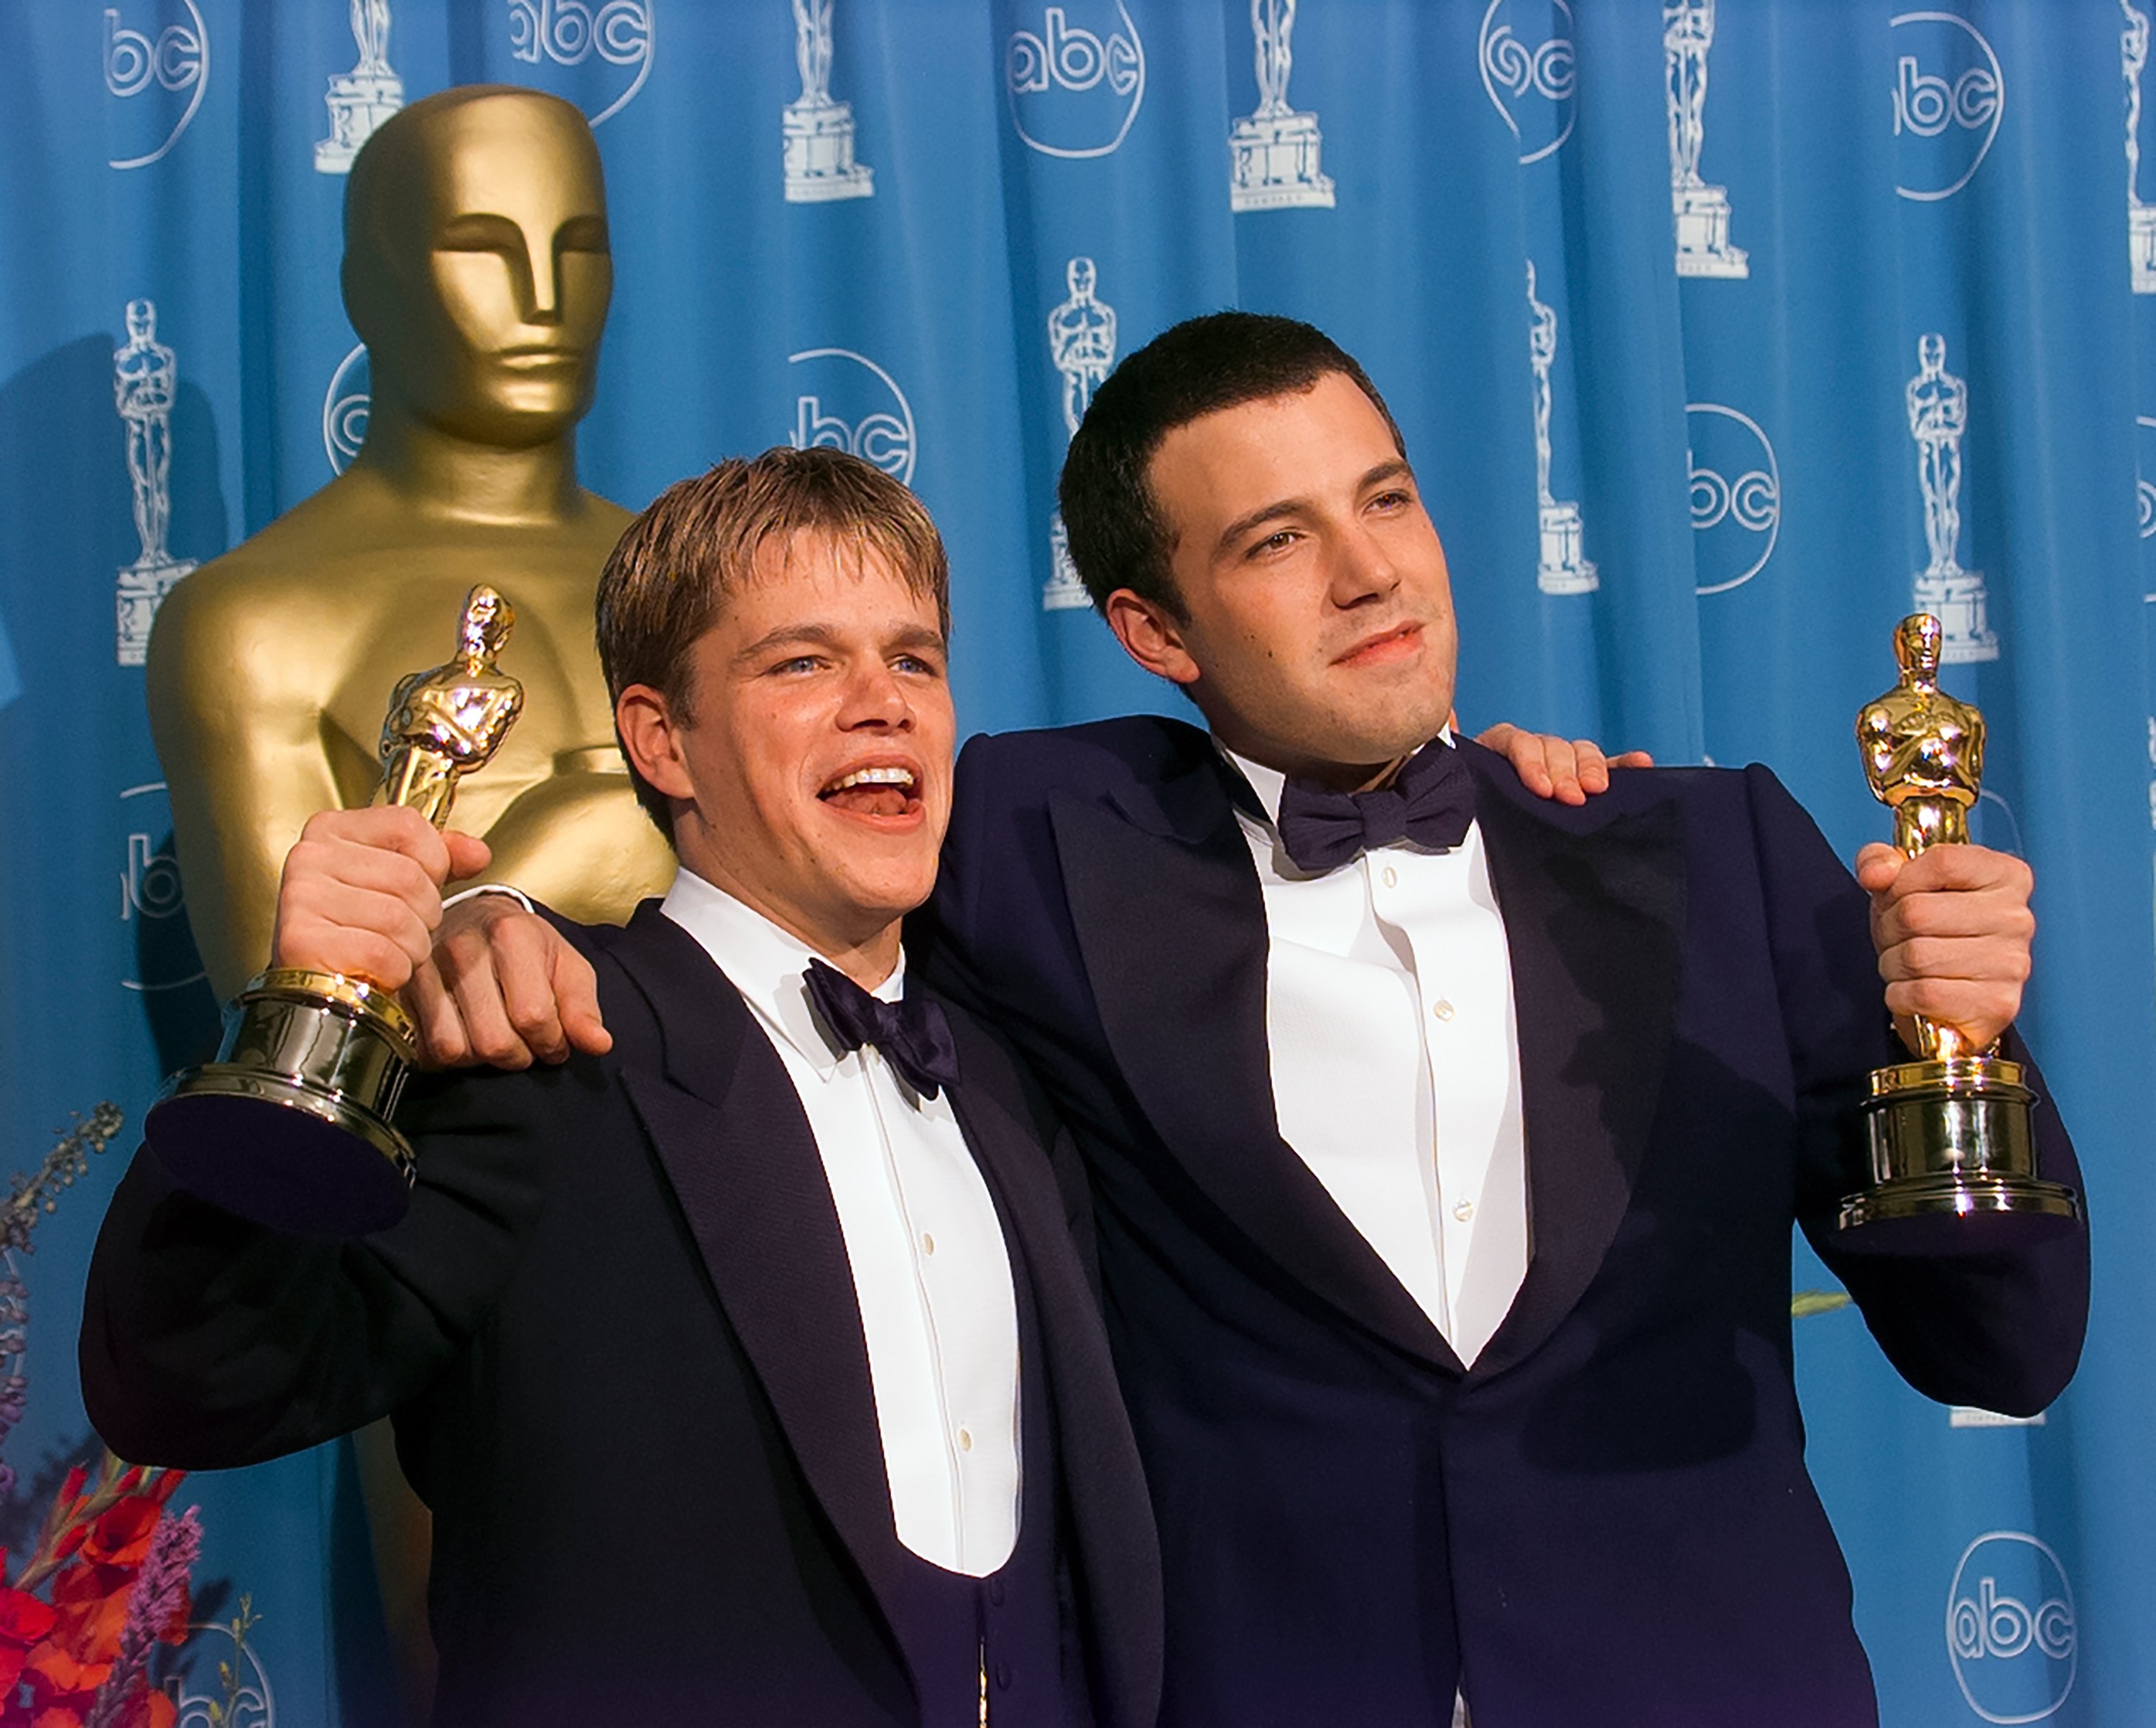 Matt Damon and Ben Affleck embracing each other while accepting their Oscars for 'Good Will Hunting.'